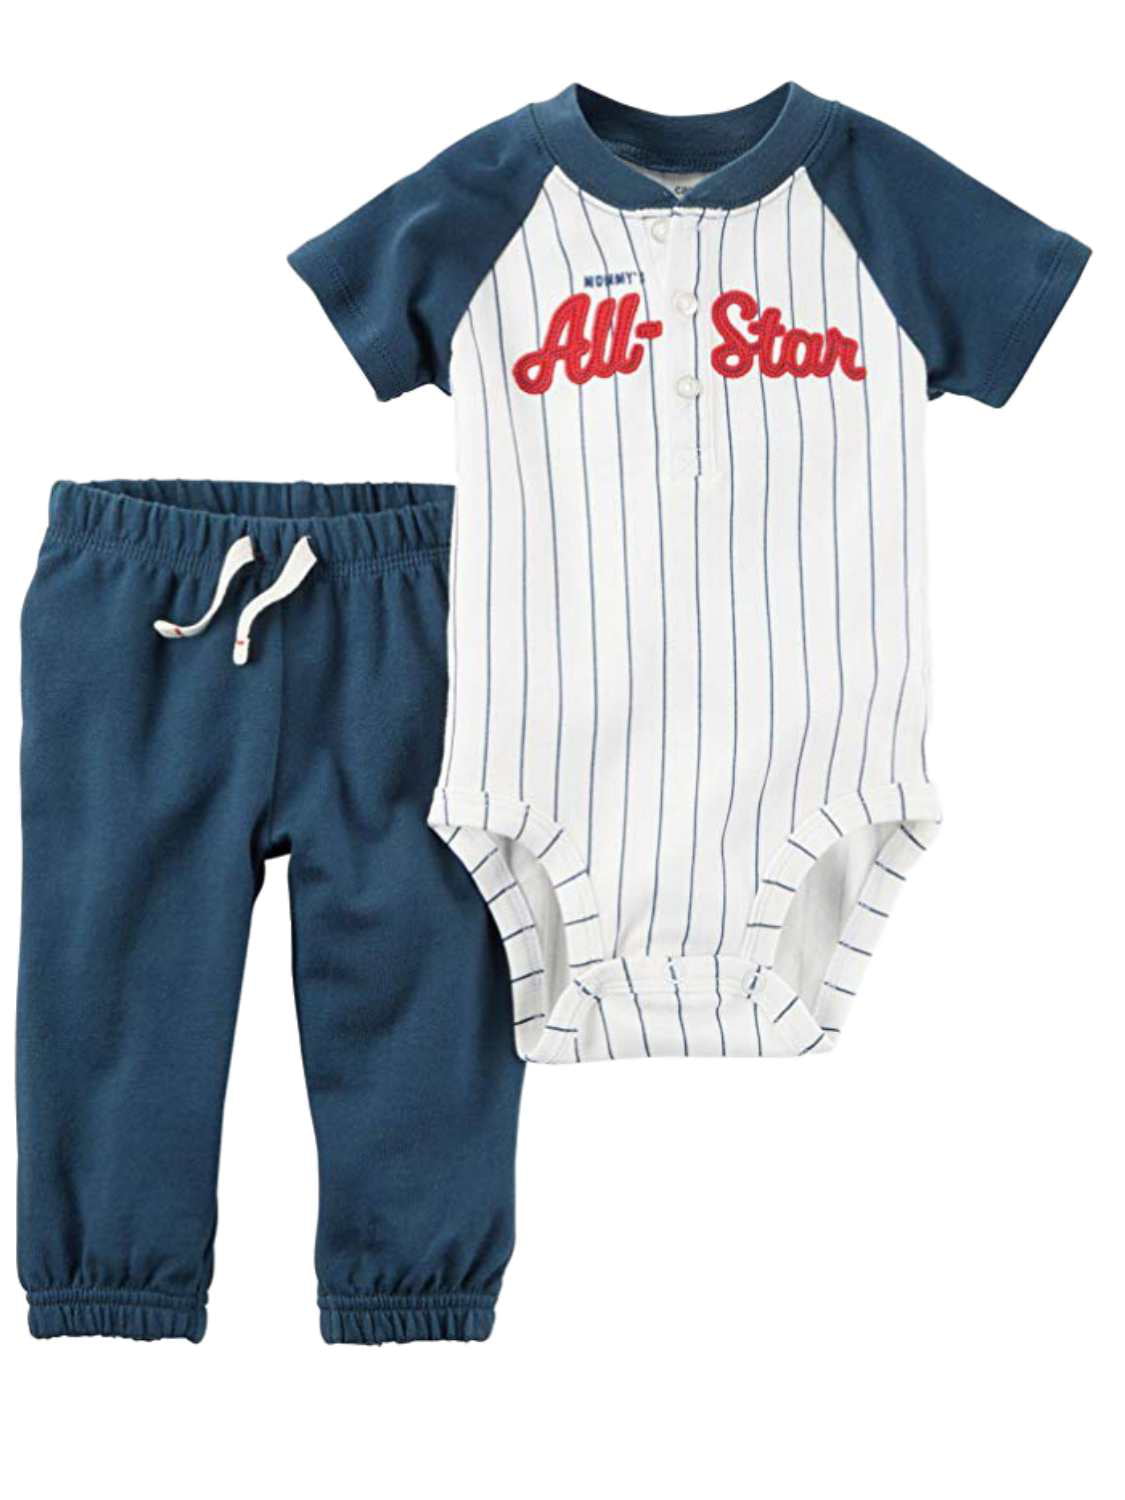 Star Baseball Baby Outfit Bodysuit 